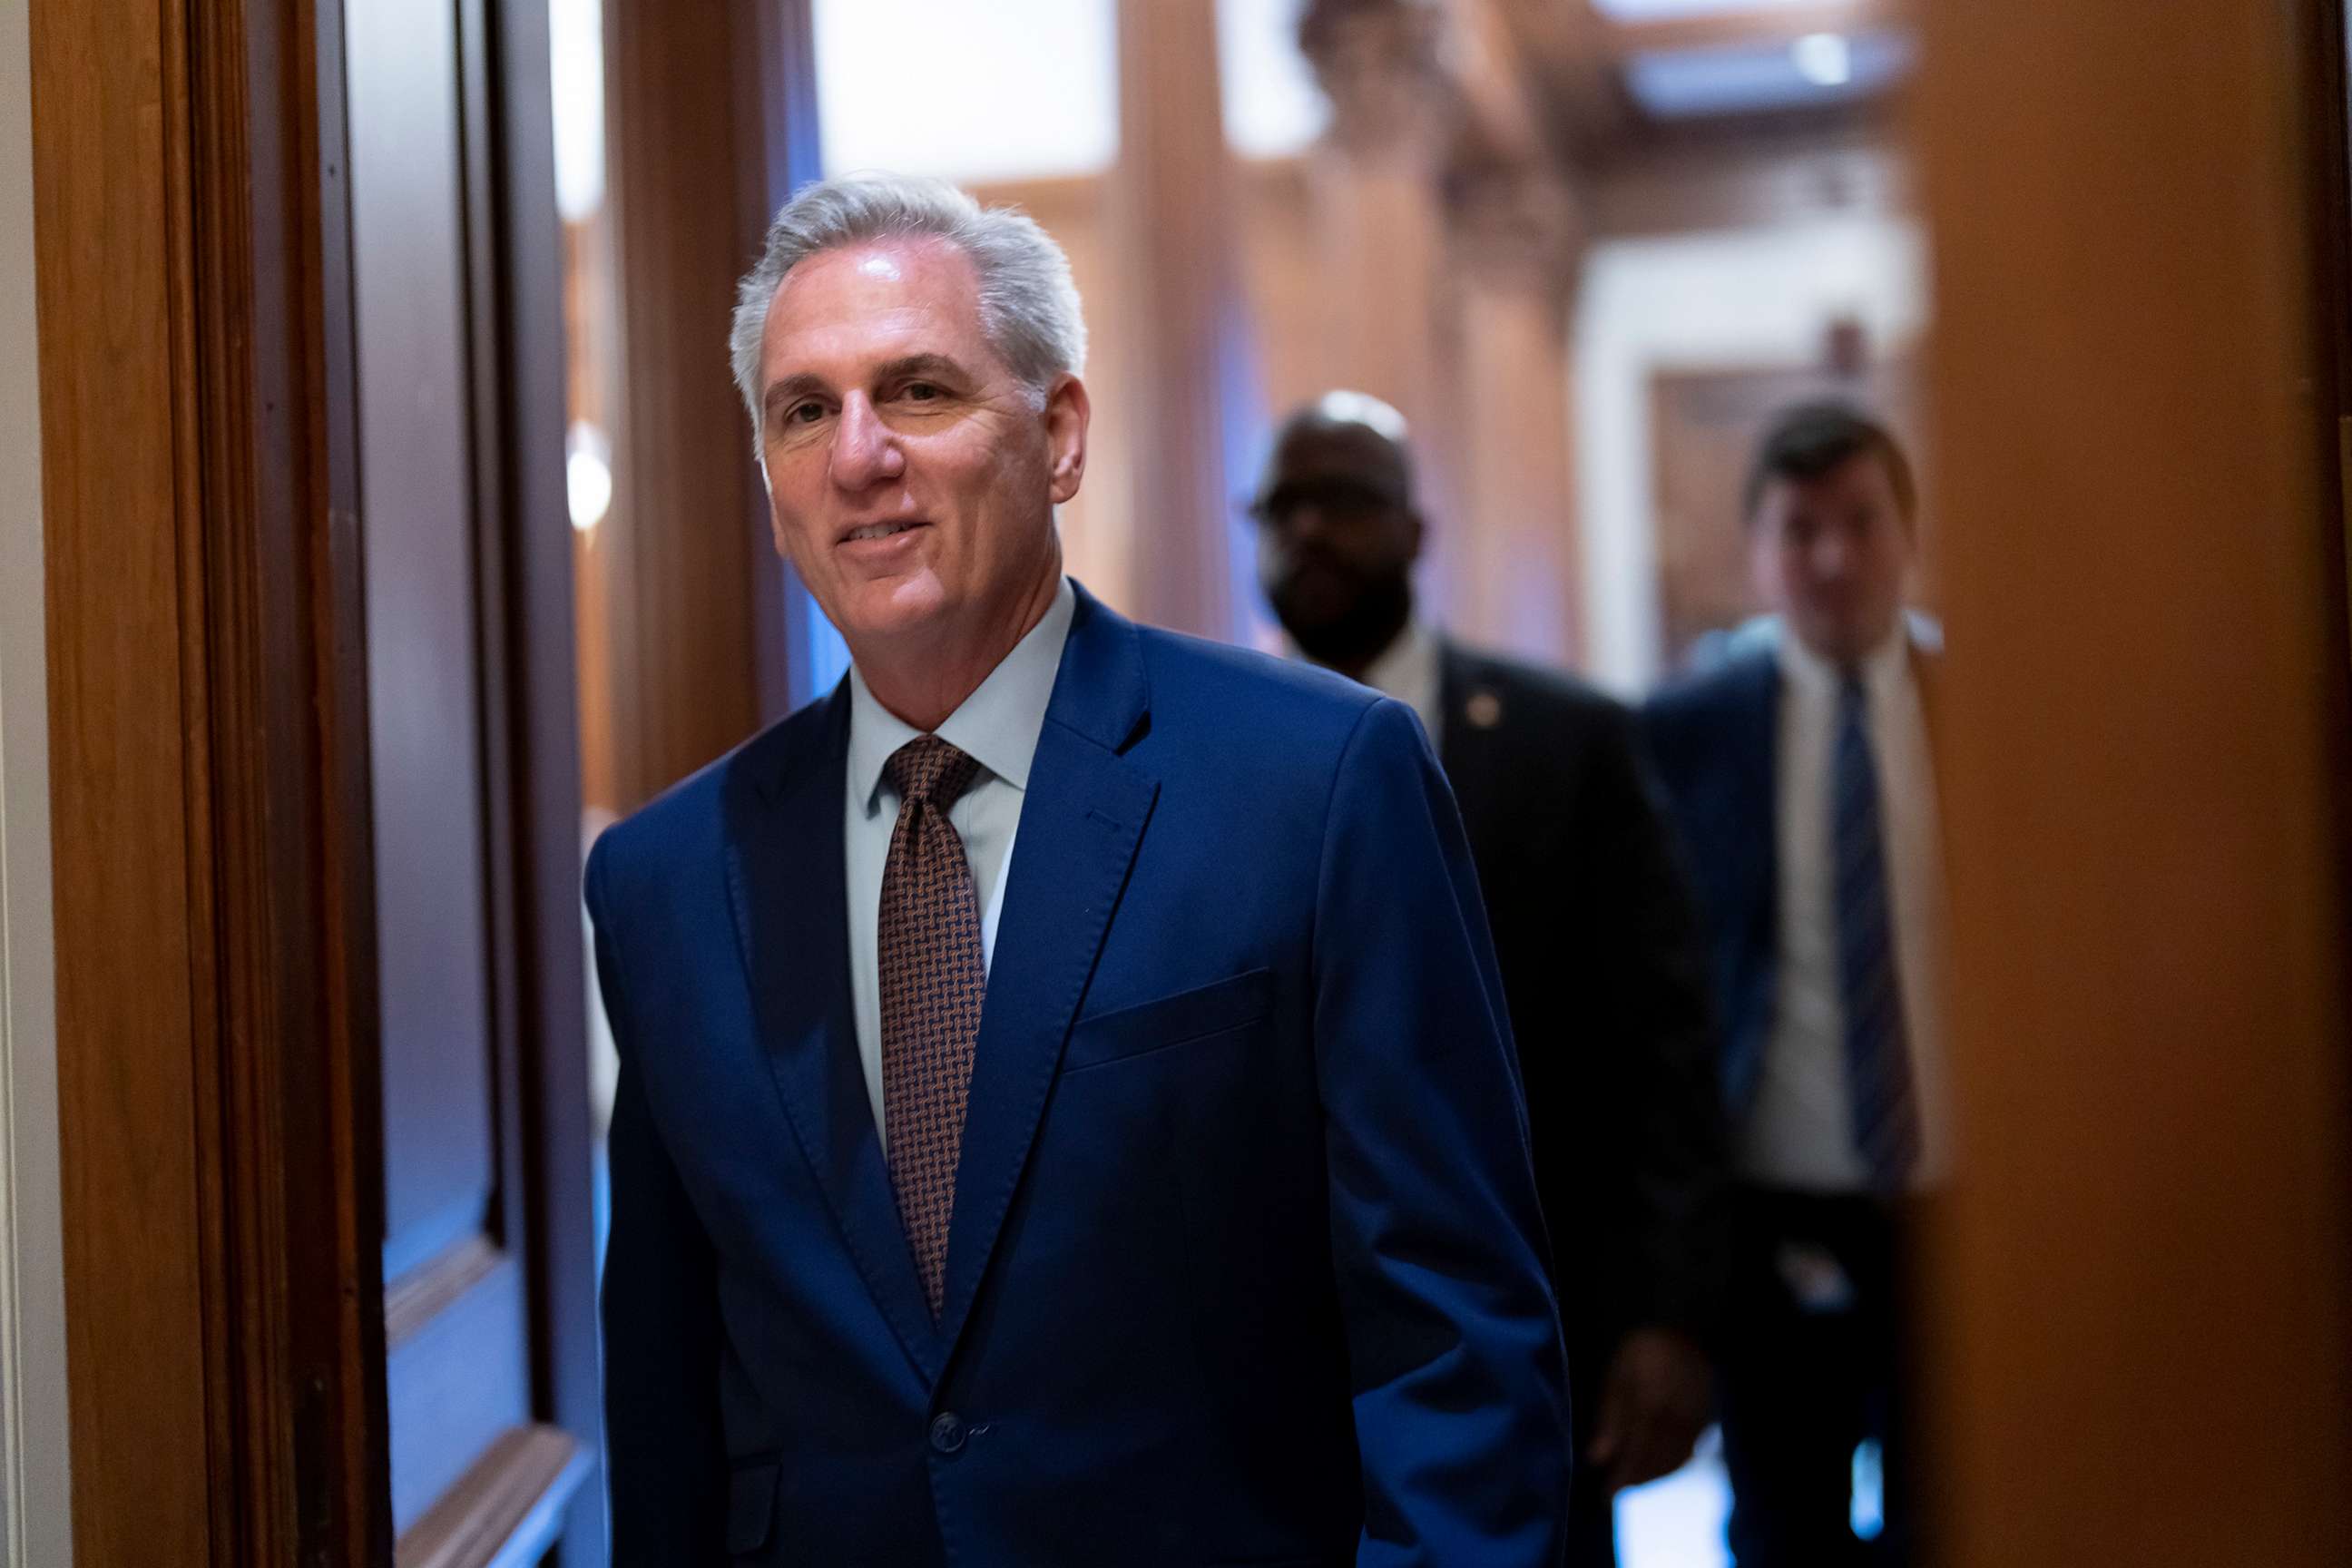 PHOTO: House Minority Leader Kevin McCarthy walks to the chamber for final votes as the House wraps up its work for the week, at the Capitol in Washington, Dec. 2, 2022.